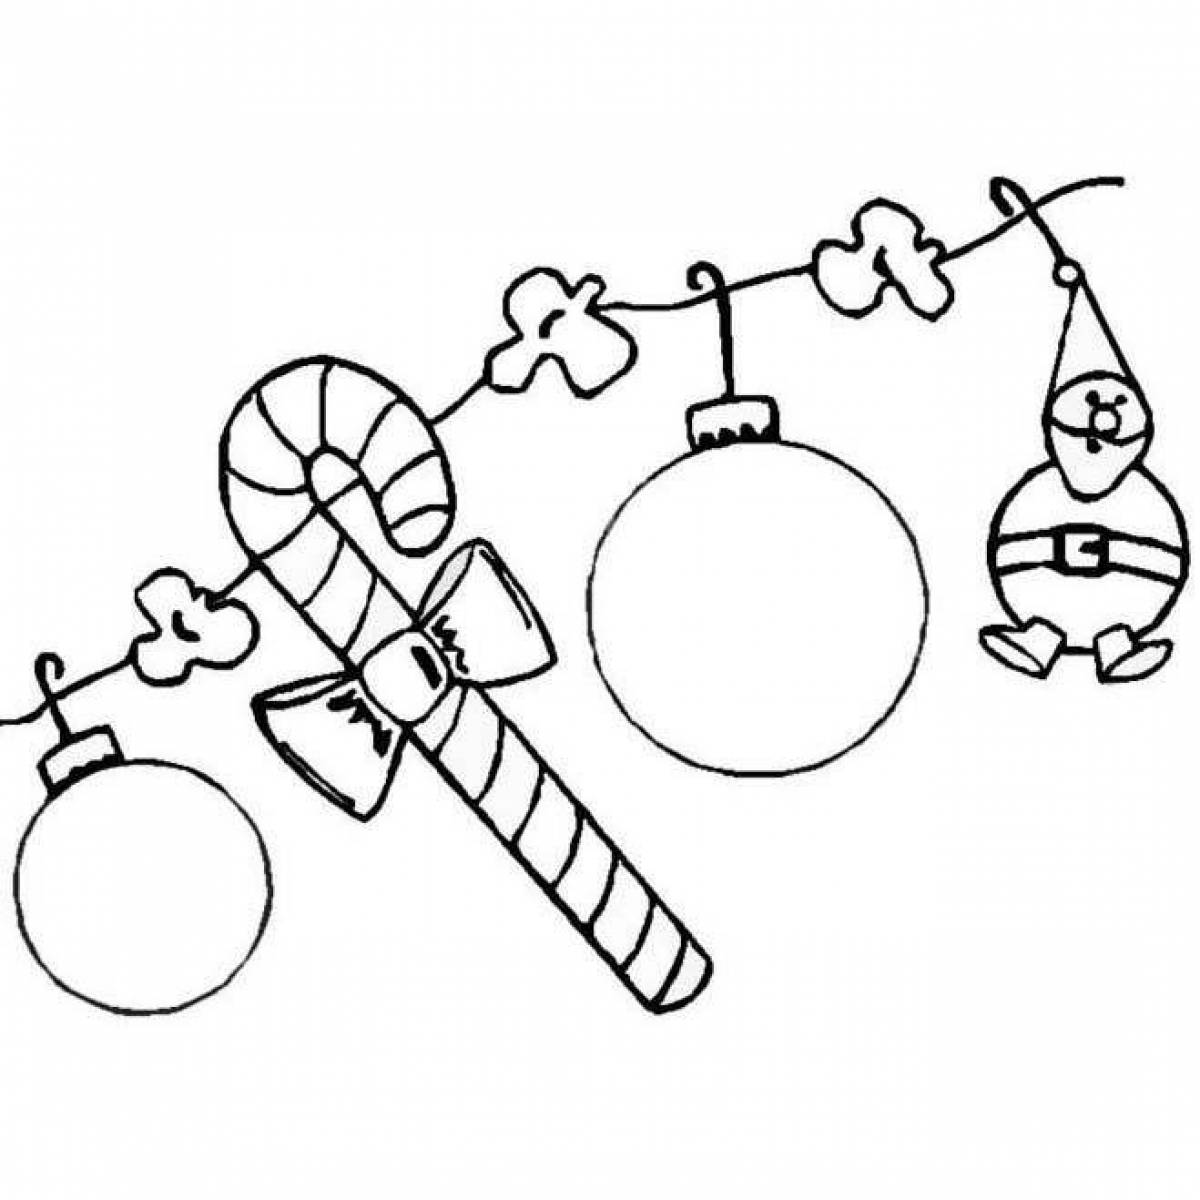 Majestic Christmas garland coloring page